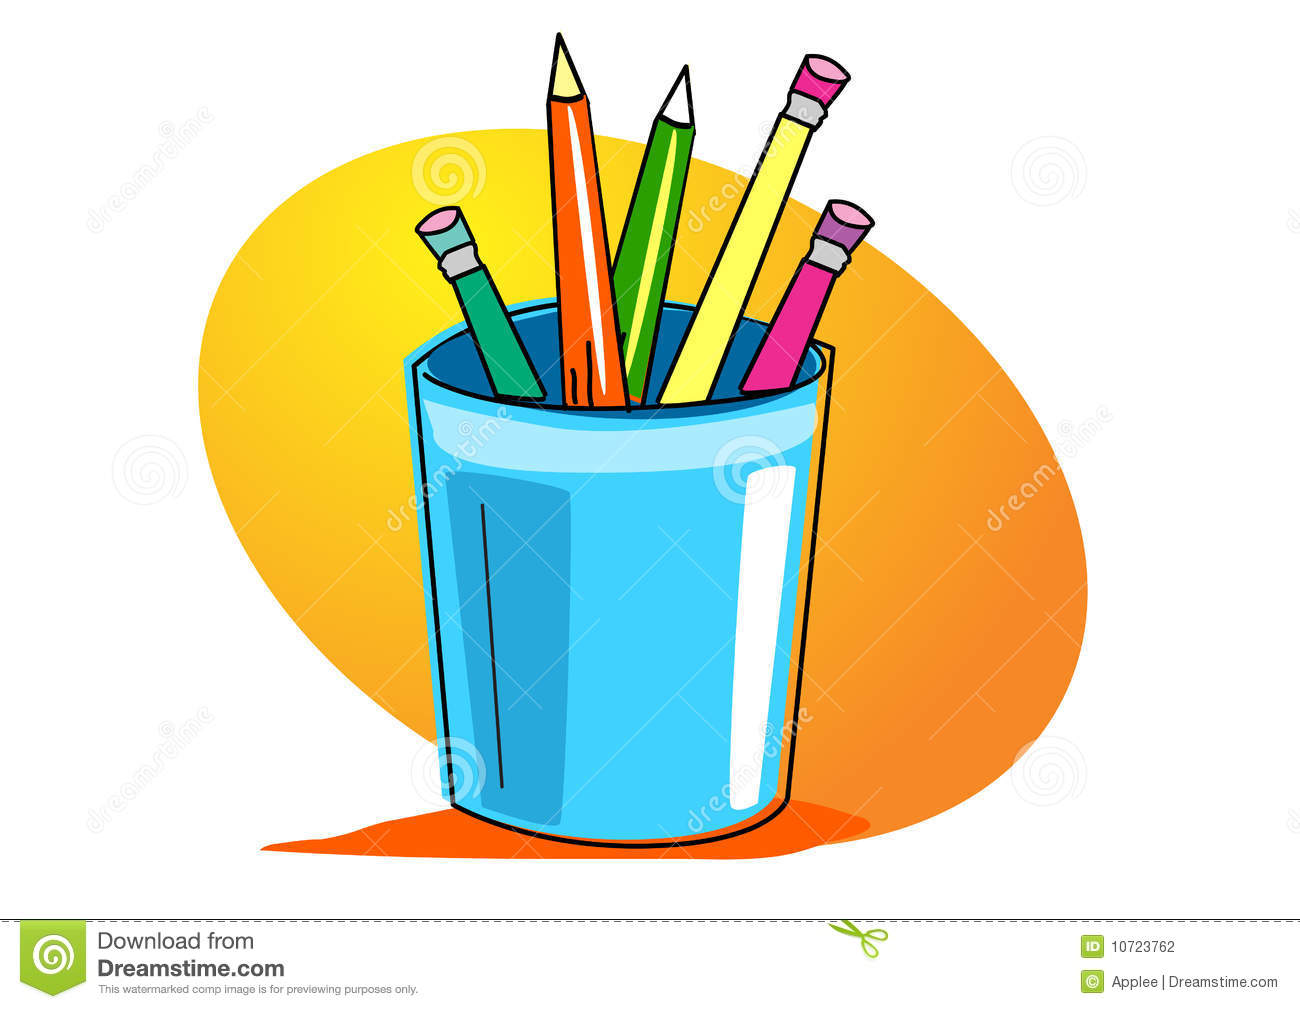 Painting Supplies Illustration Stock Photography   Image  10723762